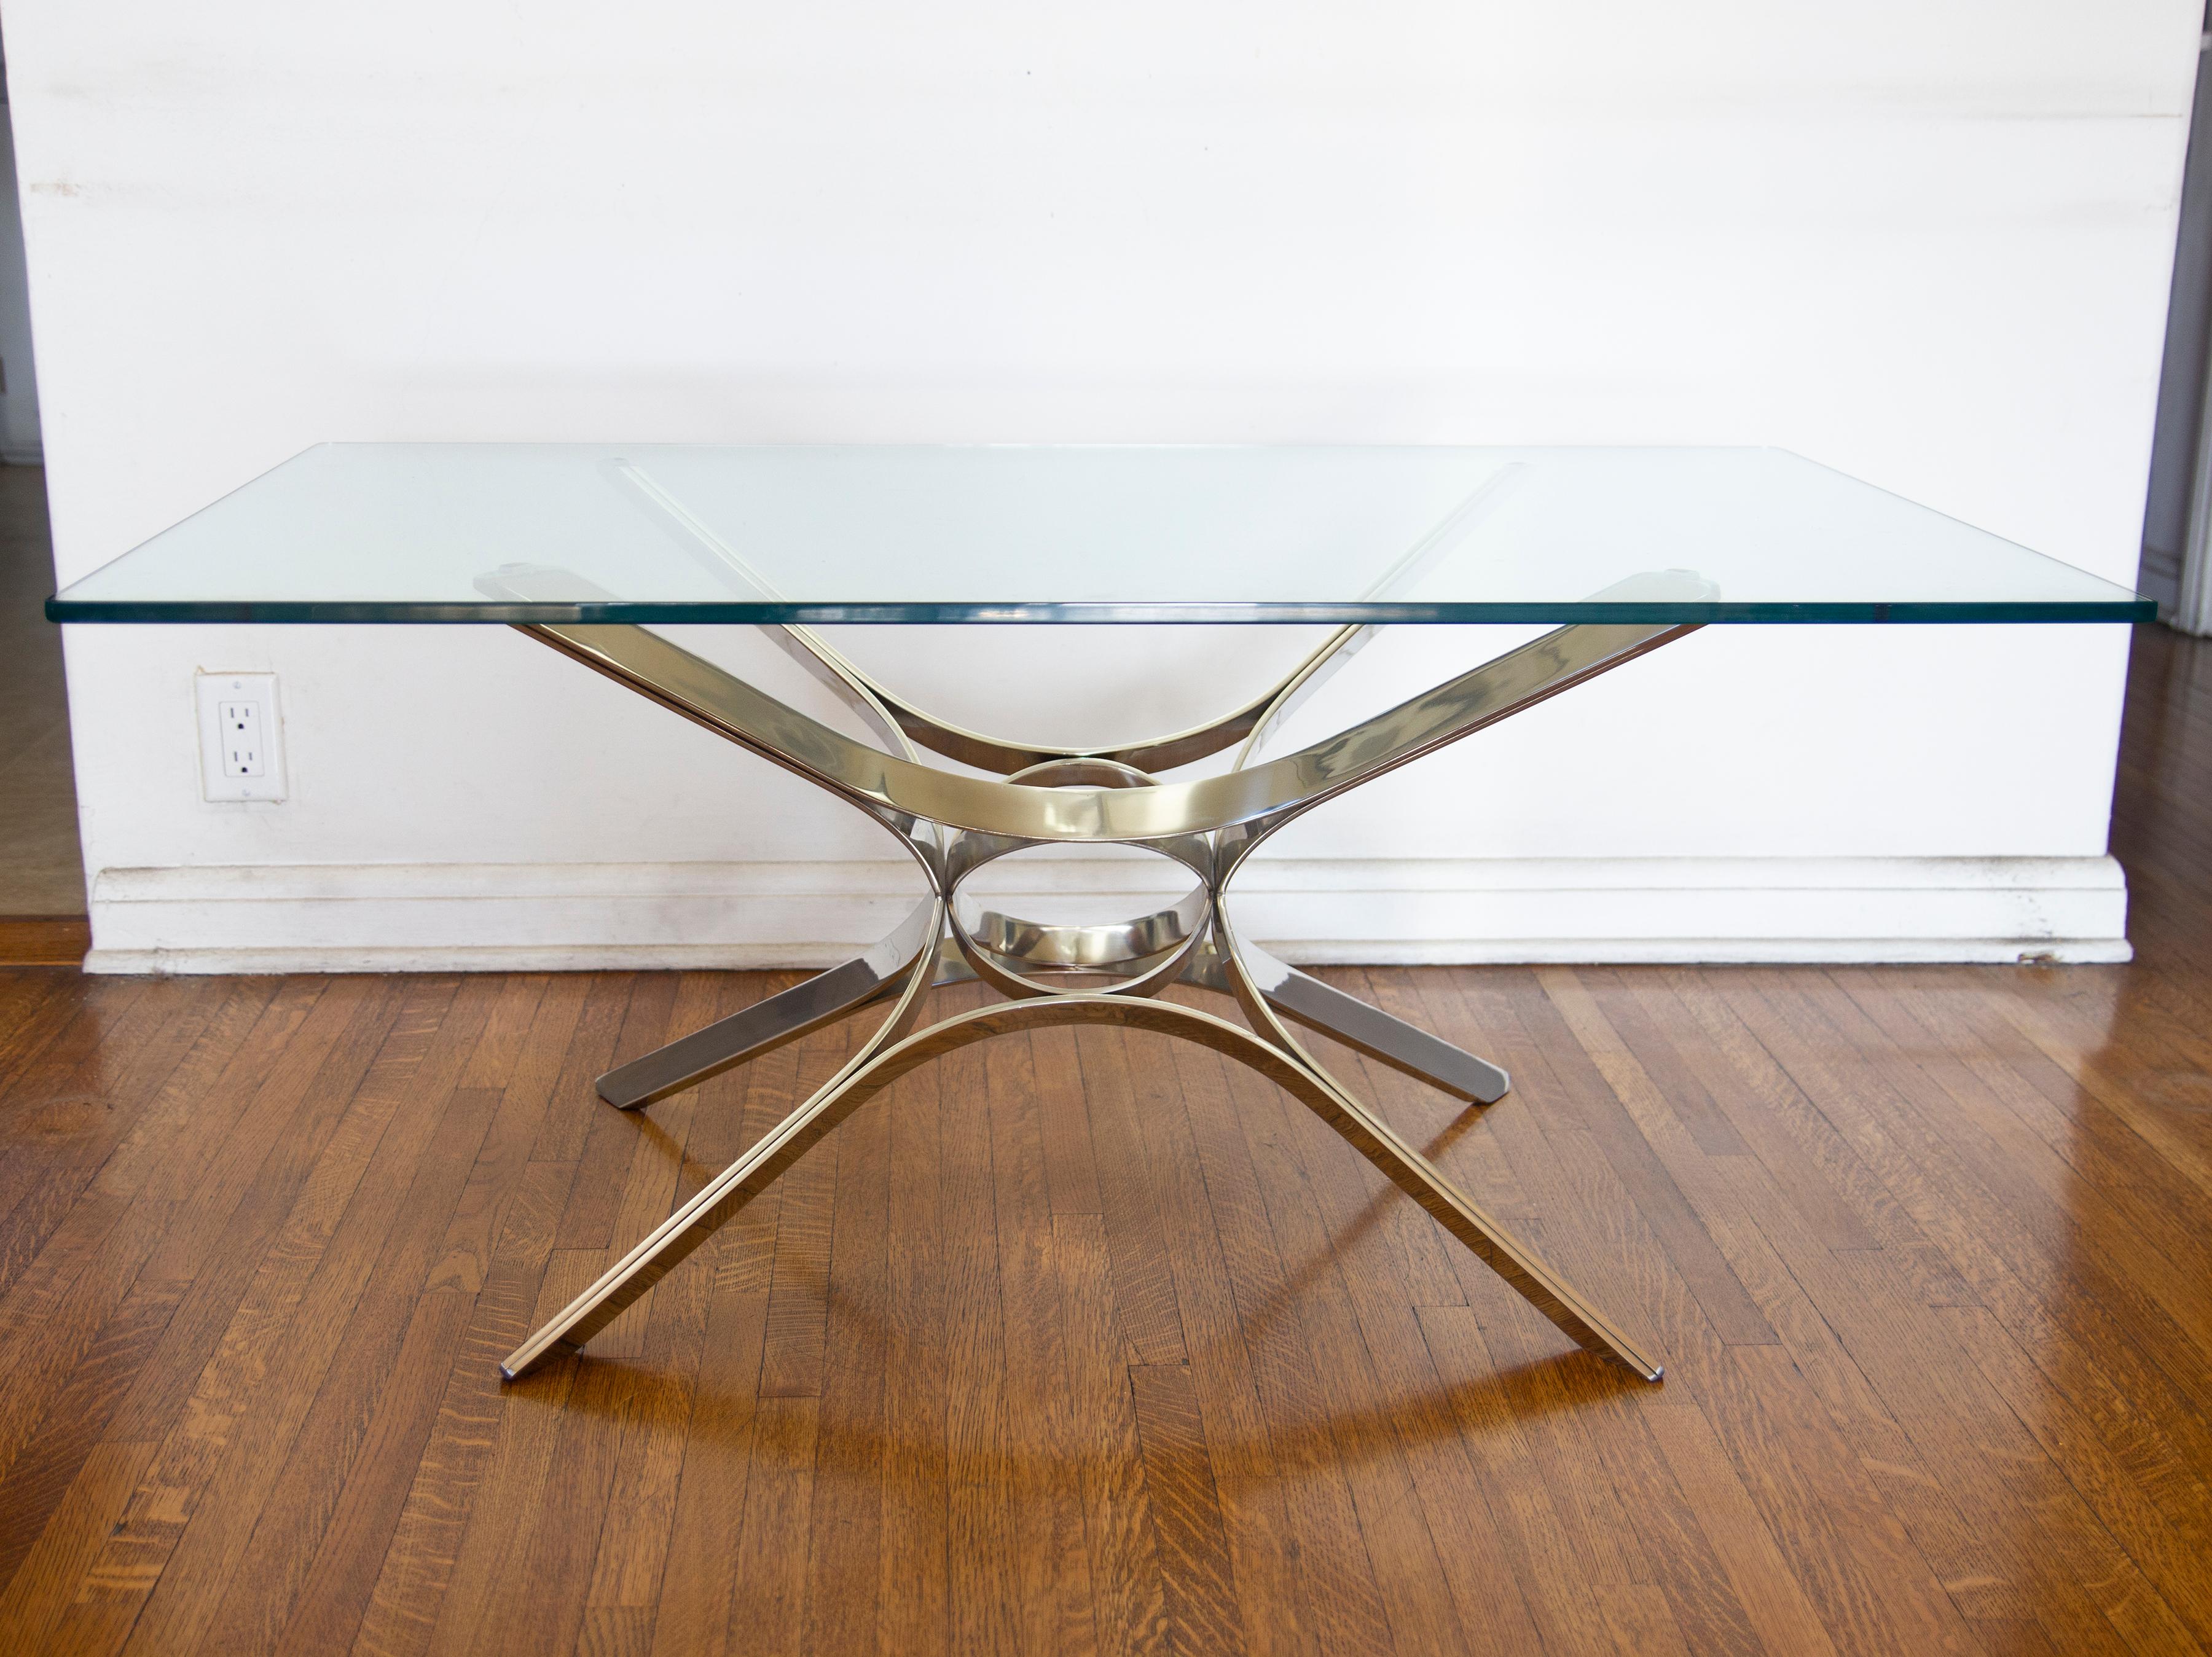 Sculptural chrome and glass coffee table attributed to Roger Sprunger for Dunbar. Excellent center piece in your living space.